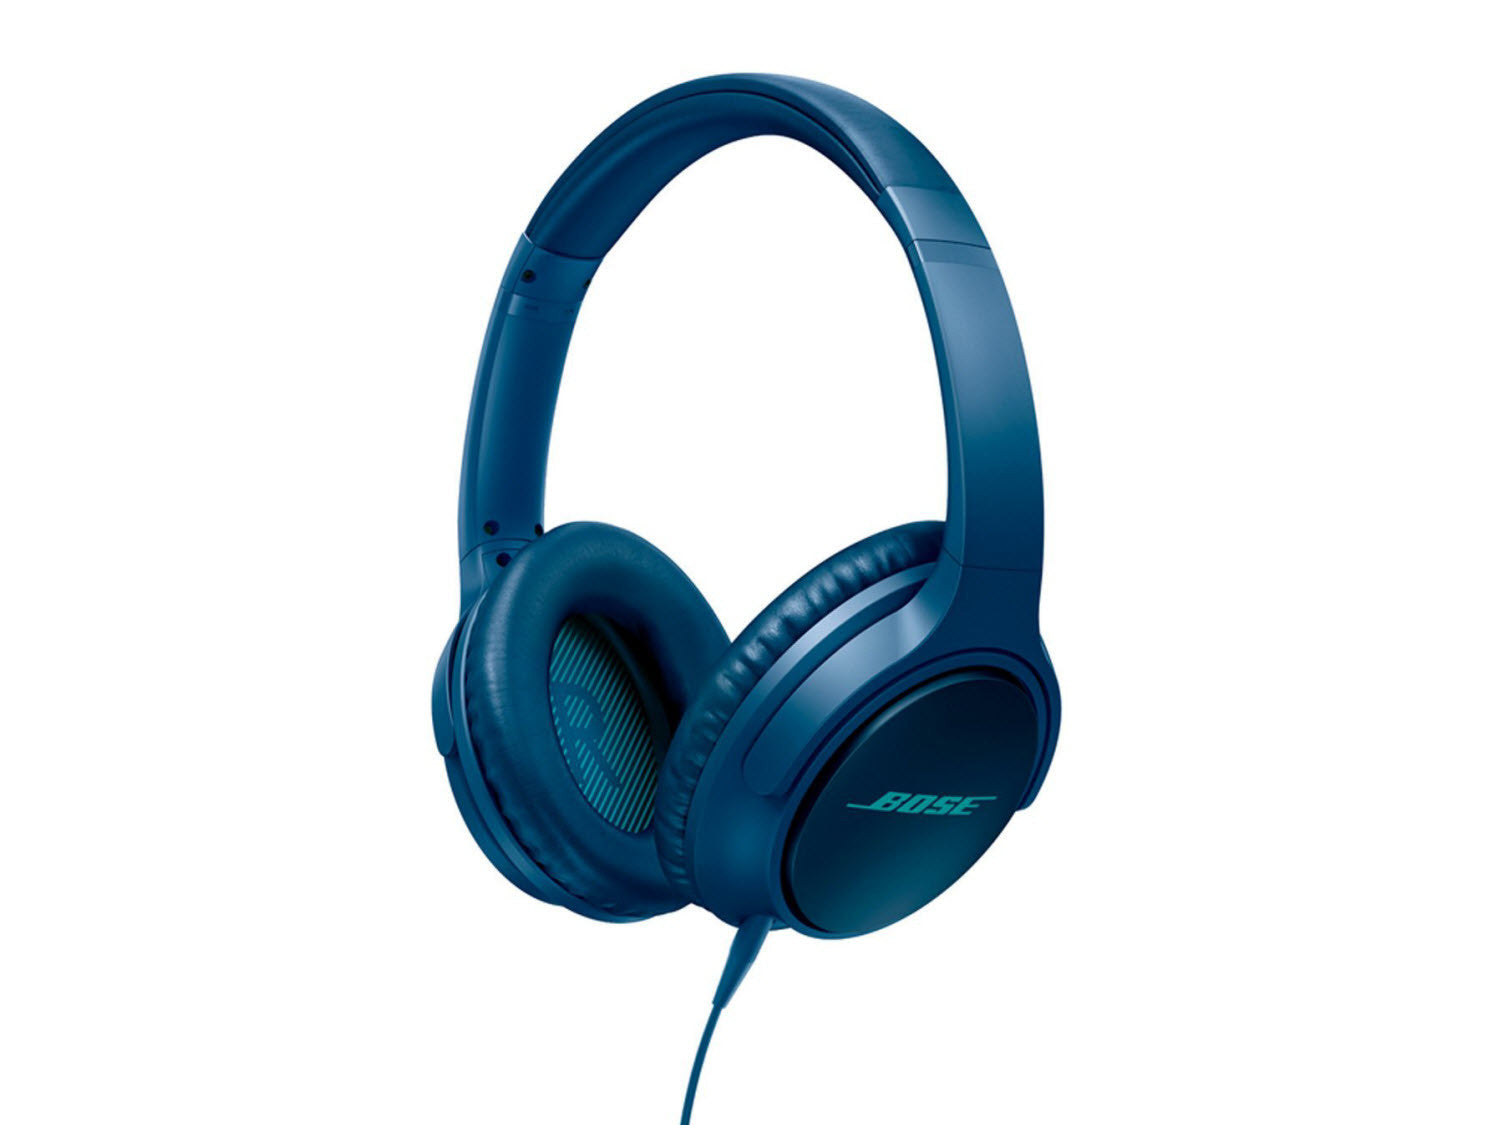 Bose SoundTrue Headphones II - Samsung and Android  - Navy Blue